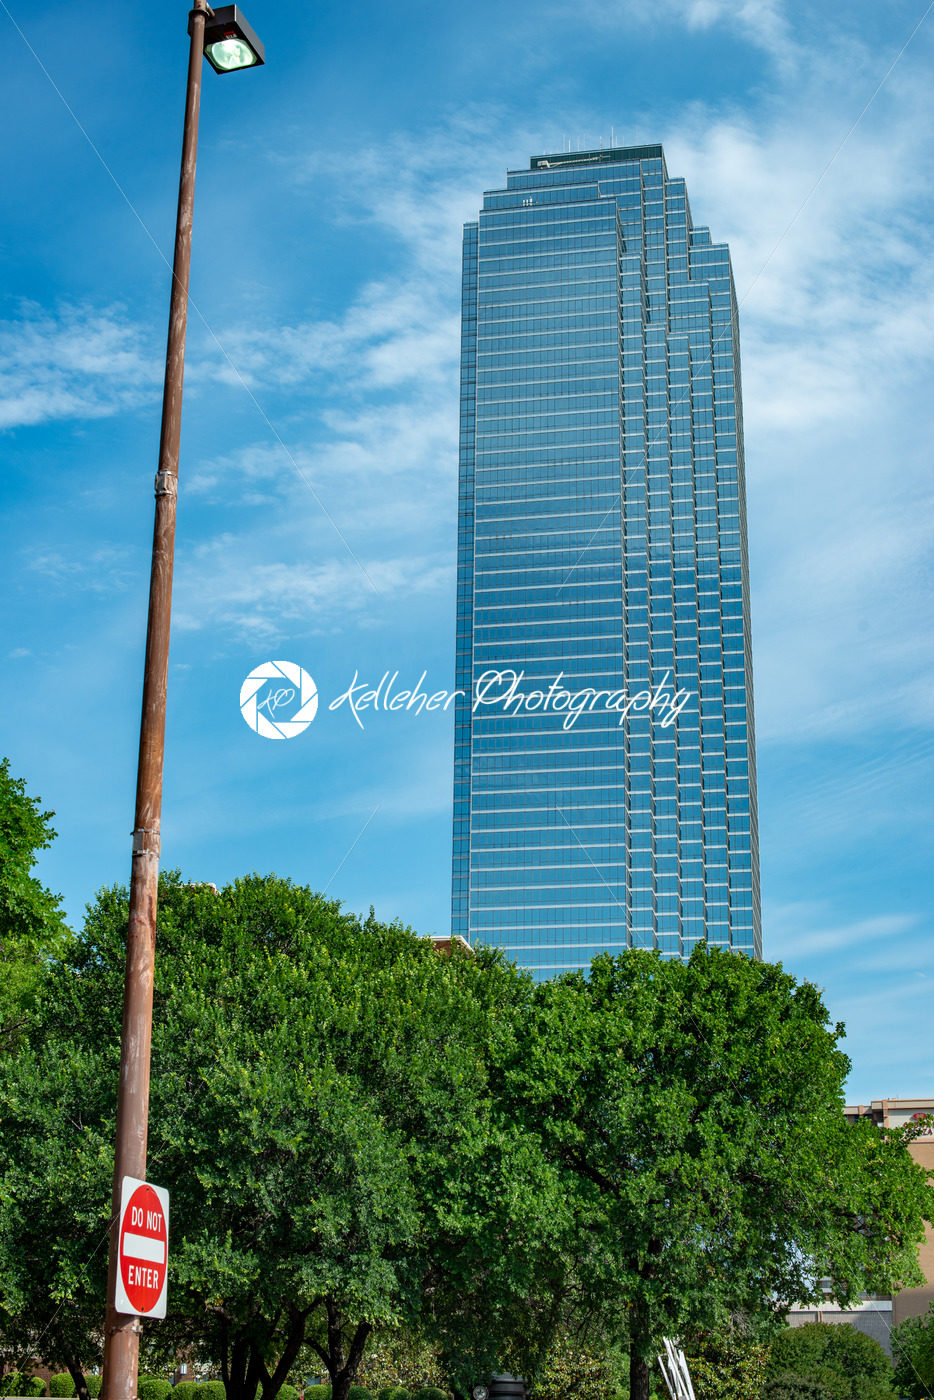 Dallas, Texas – May 7, 2018: Buildings in Downtown Dallas Texas - Kelleher Photography Store